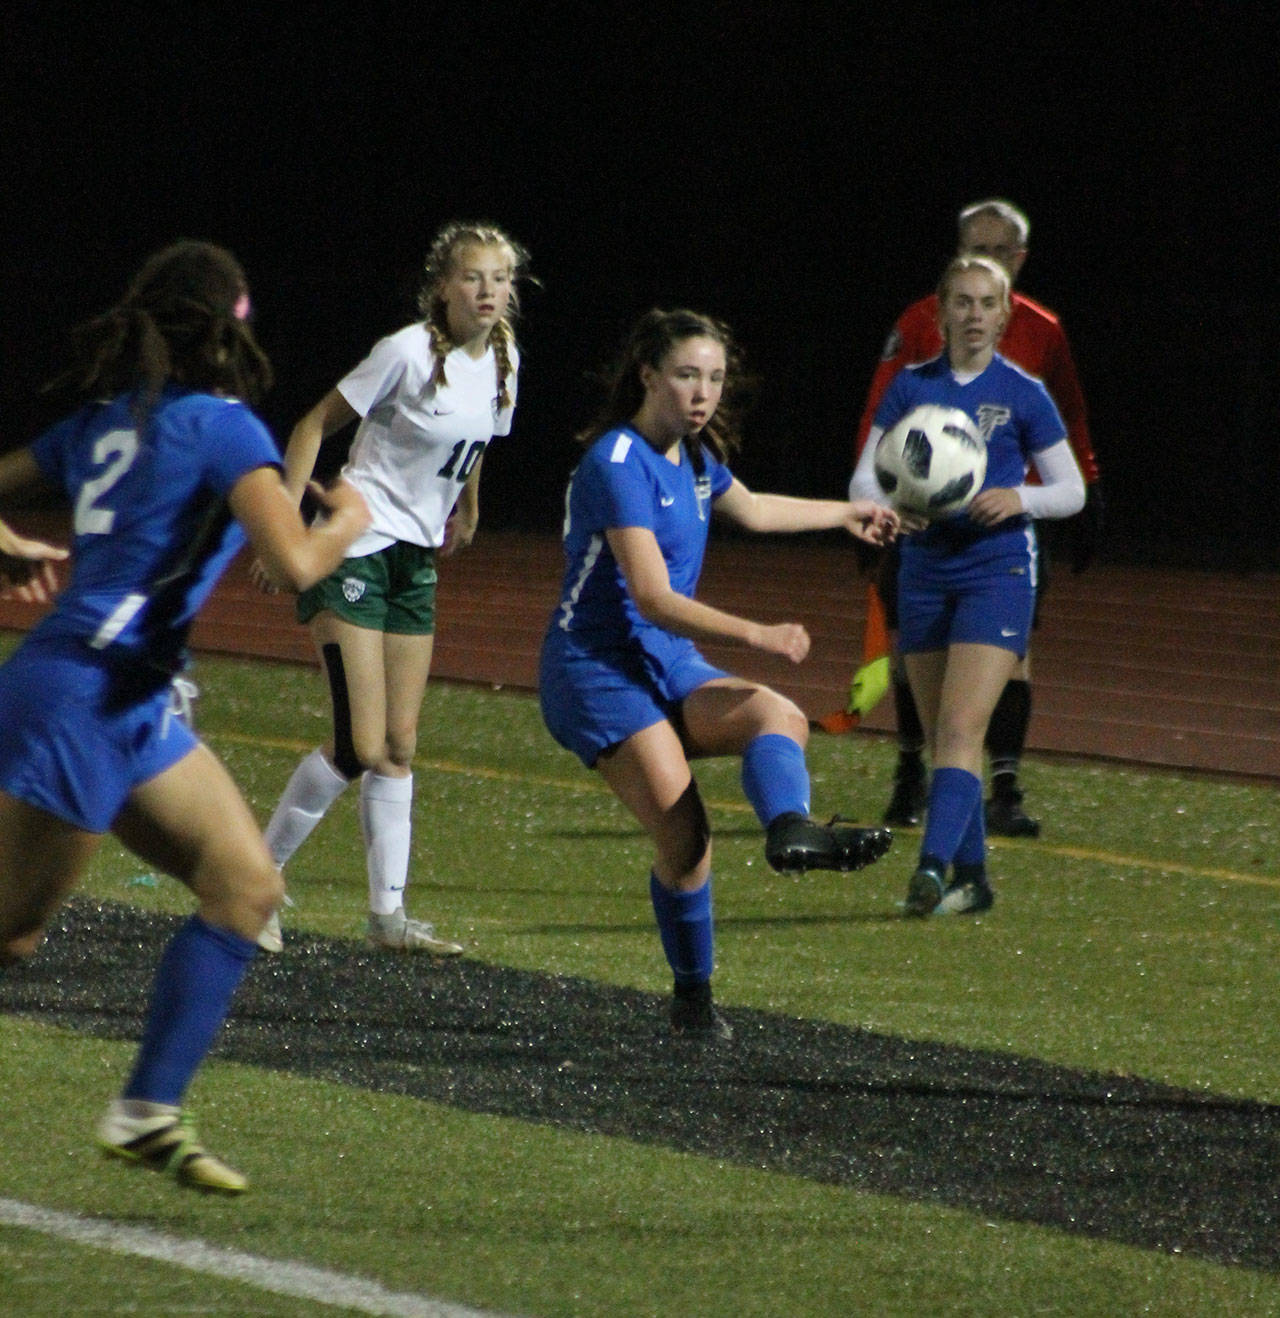 Kelly Murnane advances the ball for the Falcons. (Photo by Jim Waller/South Whidbey Record)